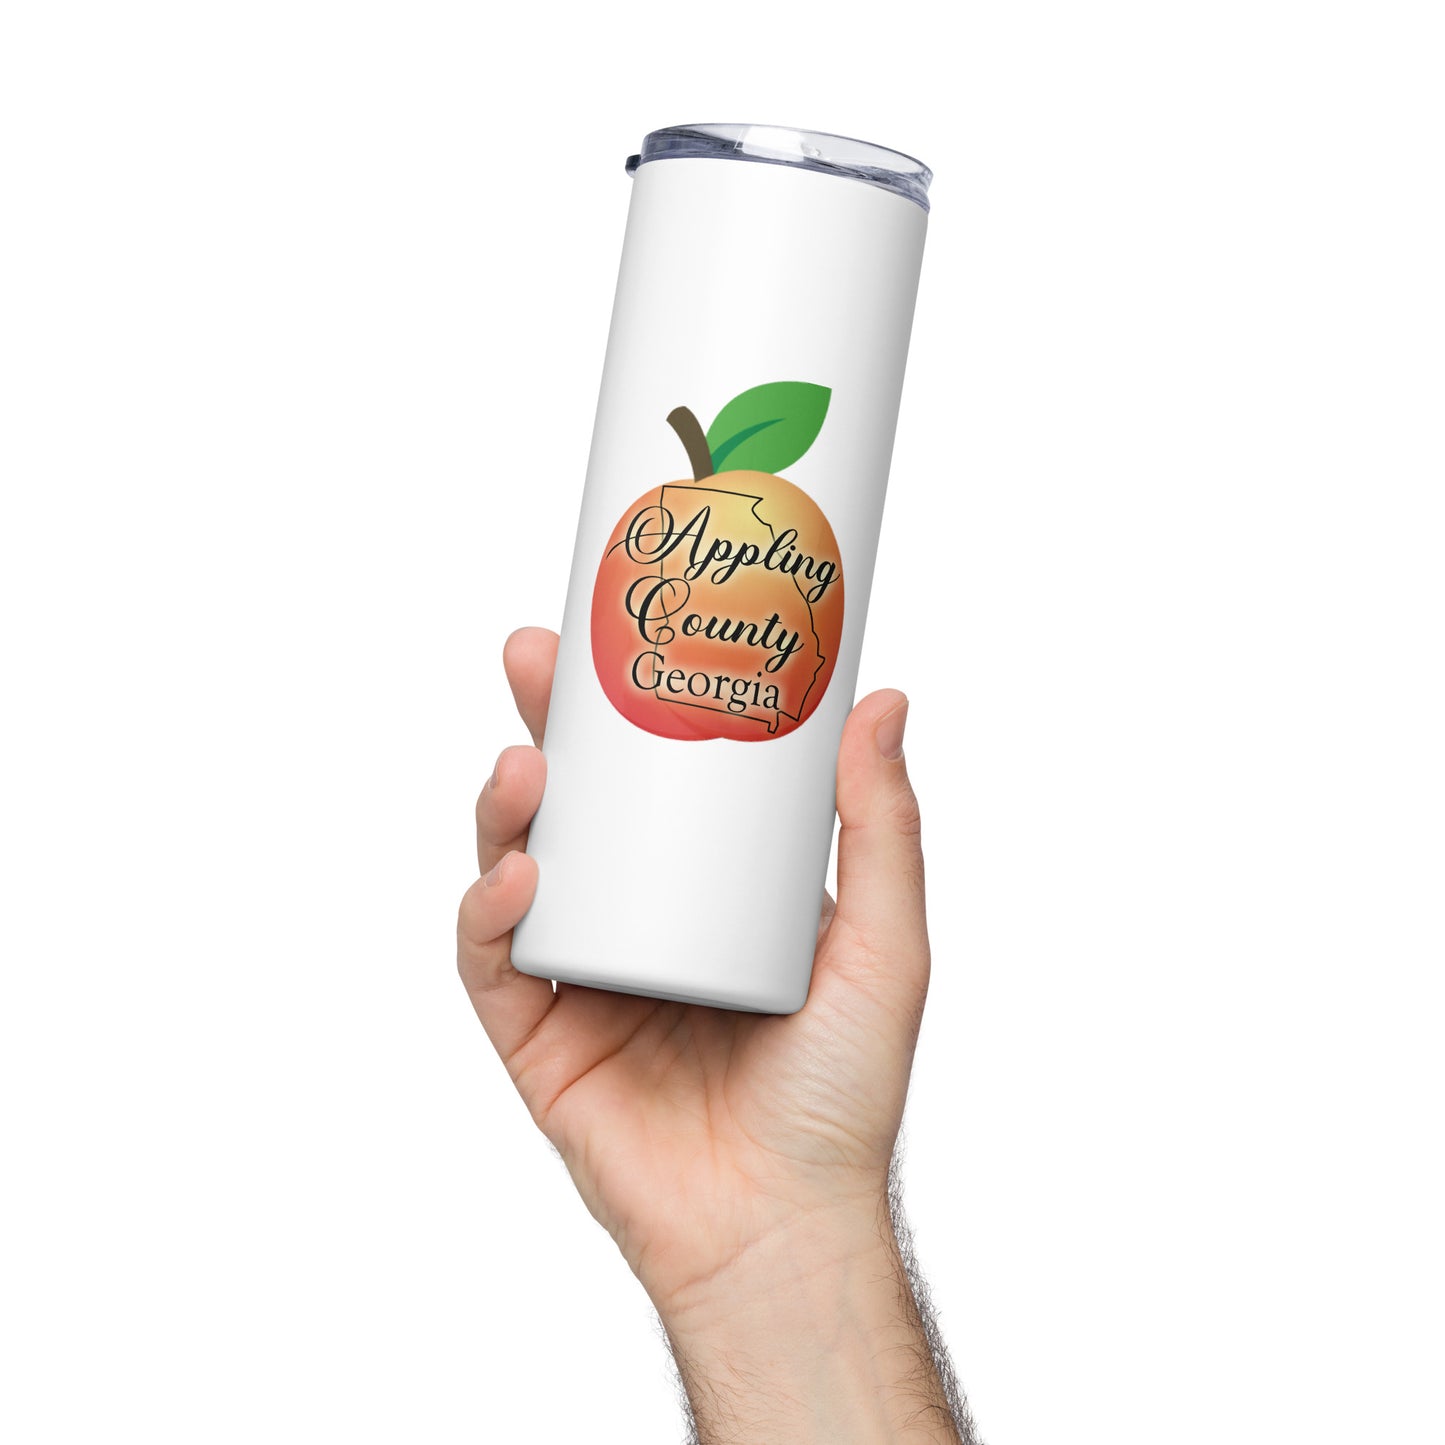 Appling County Georgia State Outline on Peach Stainless Steel Tumbler 20 oz (600 ml)